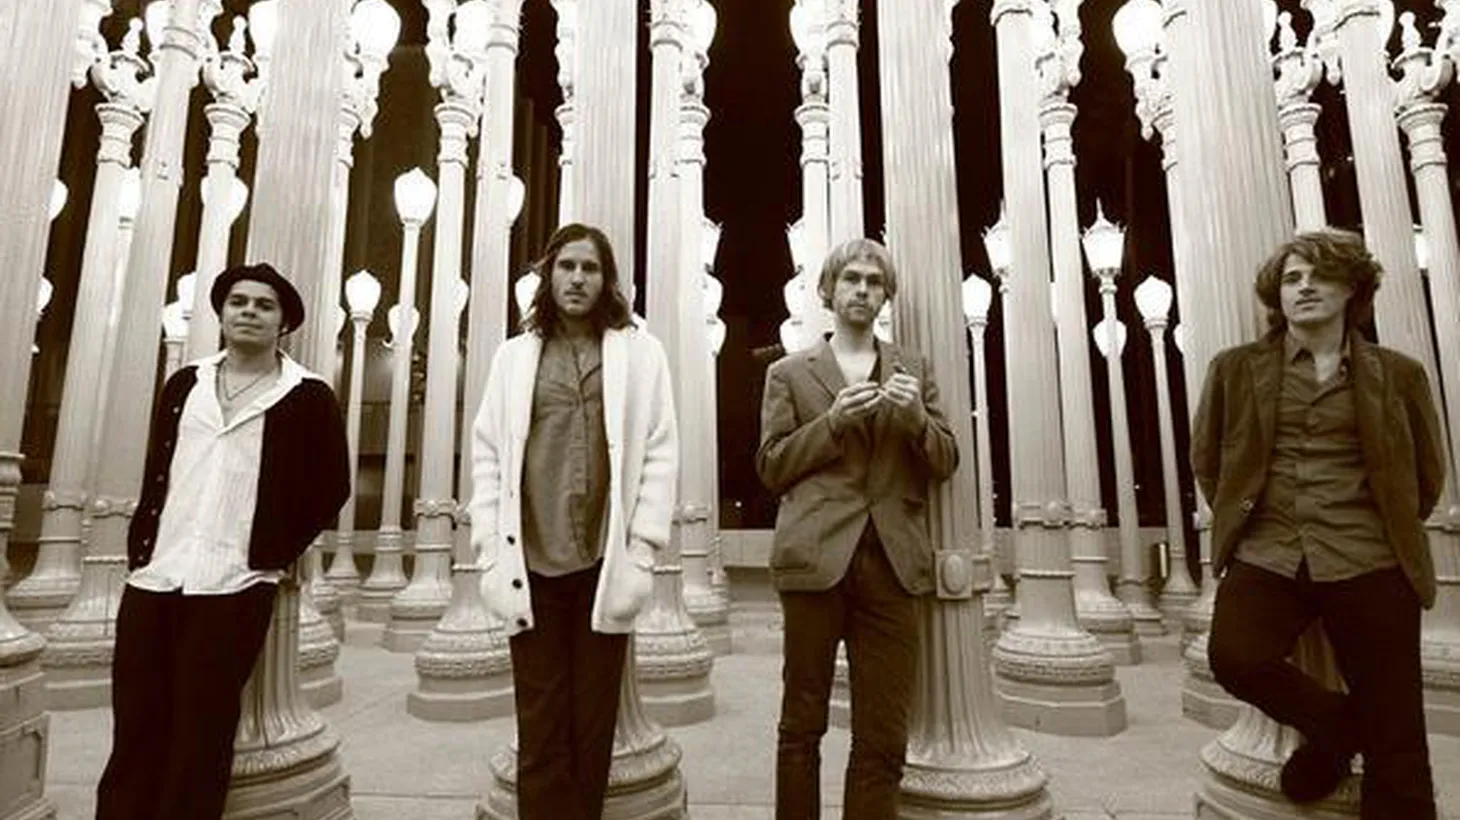 L.A.'s own Voxhaul Broadcast are a band to watch in 2010, creating hook-filled anthems of love and longing. We'll will be treated to a live session on Morning Becomes Eclectic at 11:15am before they head out to The Hammer Museum for the Also I Like To Rock series on Thursday.